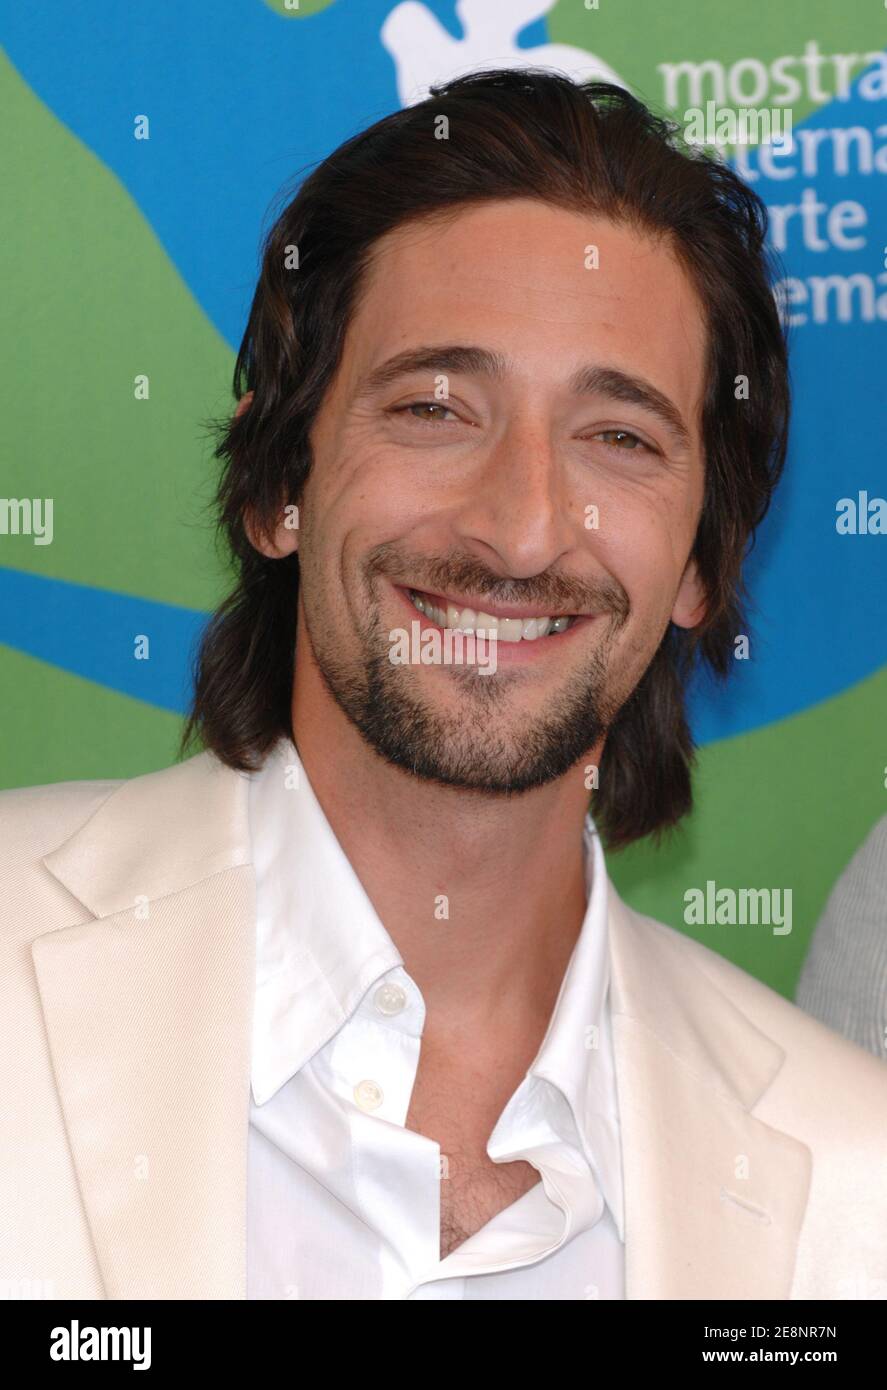 Cast member Adrien Brody poses for pictures during the photocall for 'The Darjeeling  Limited' at the 64th annual Venice Film Festival, in Venice, Italy, on  September 3, 2007. Photo by Nicolas Khayat/ABACAPRESS.COM